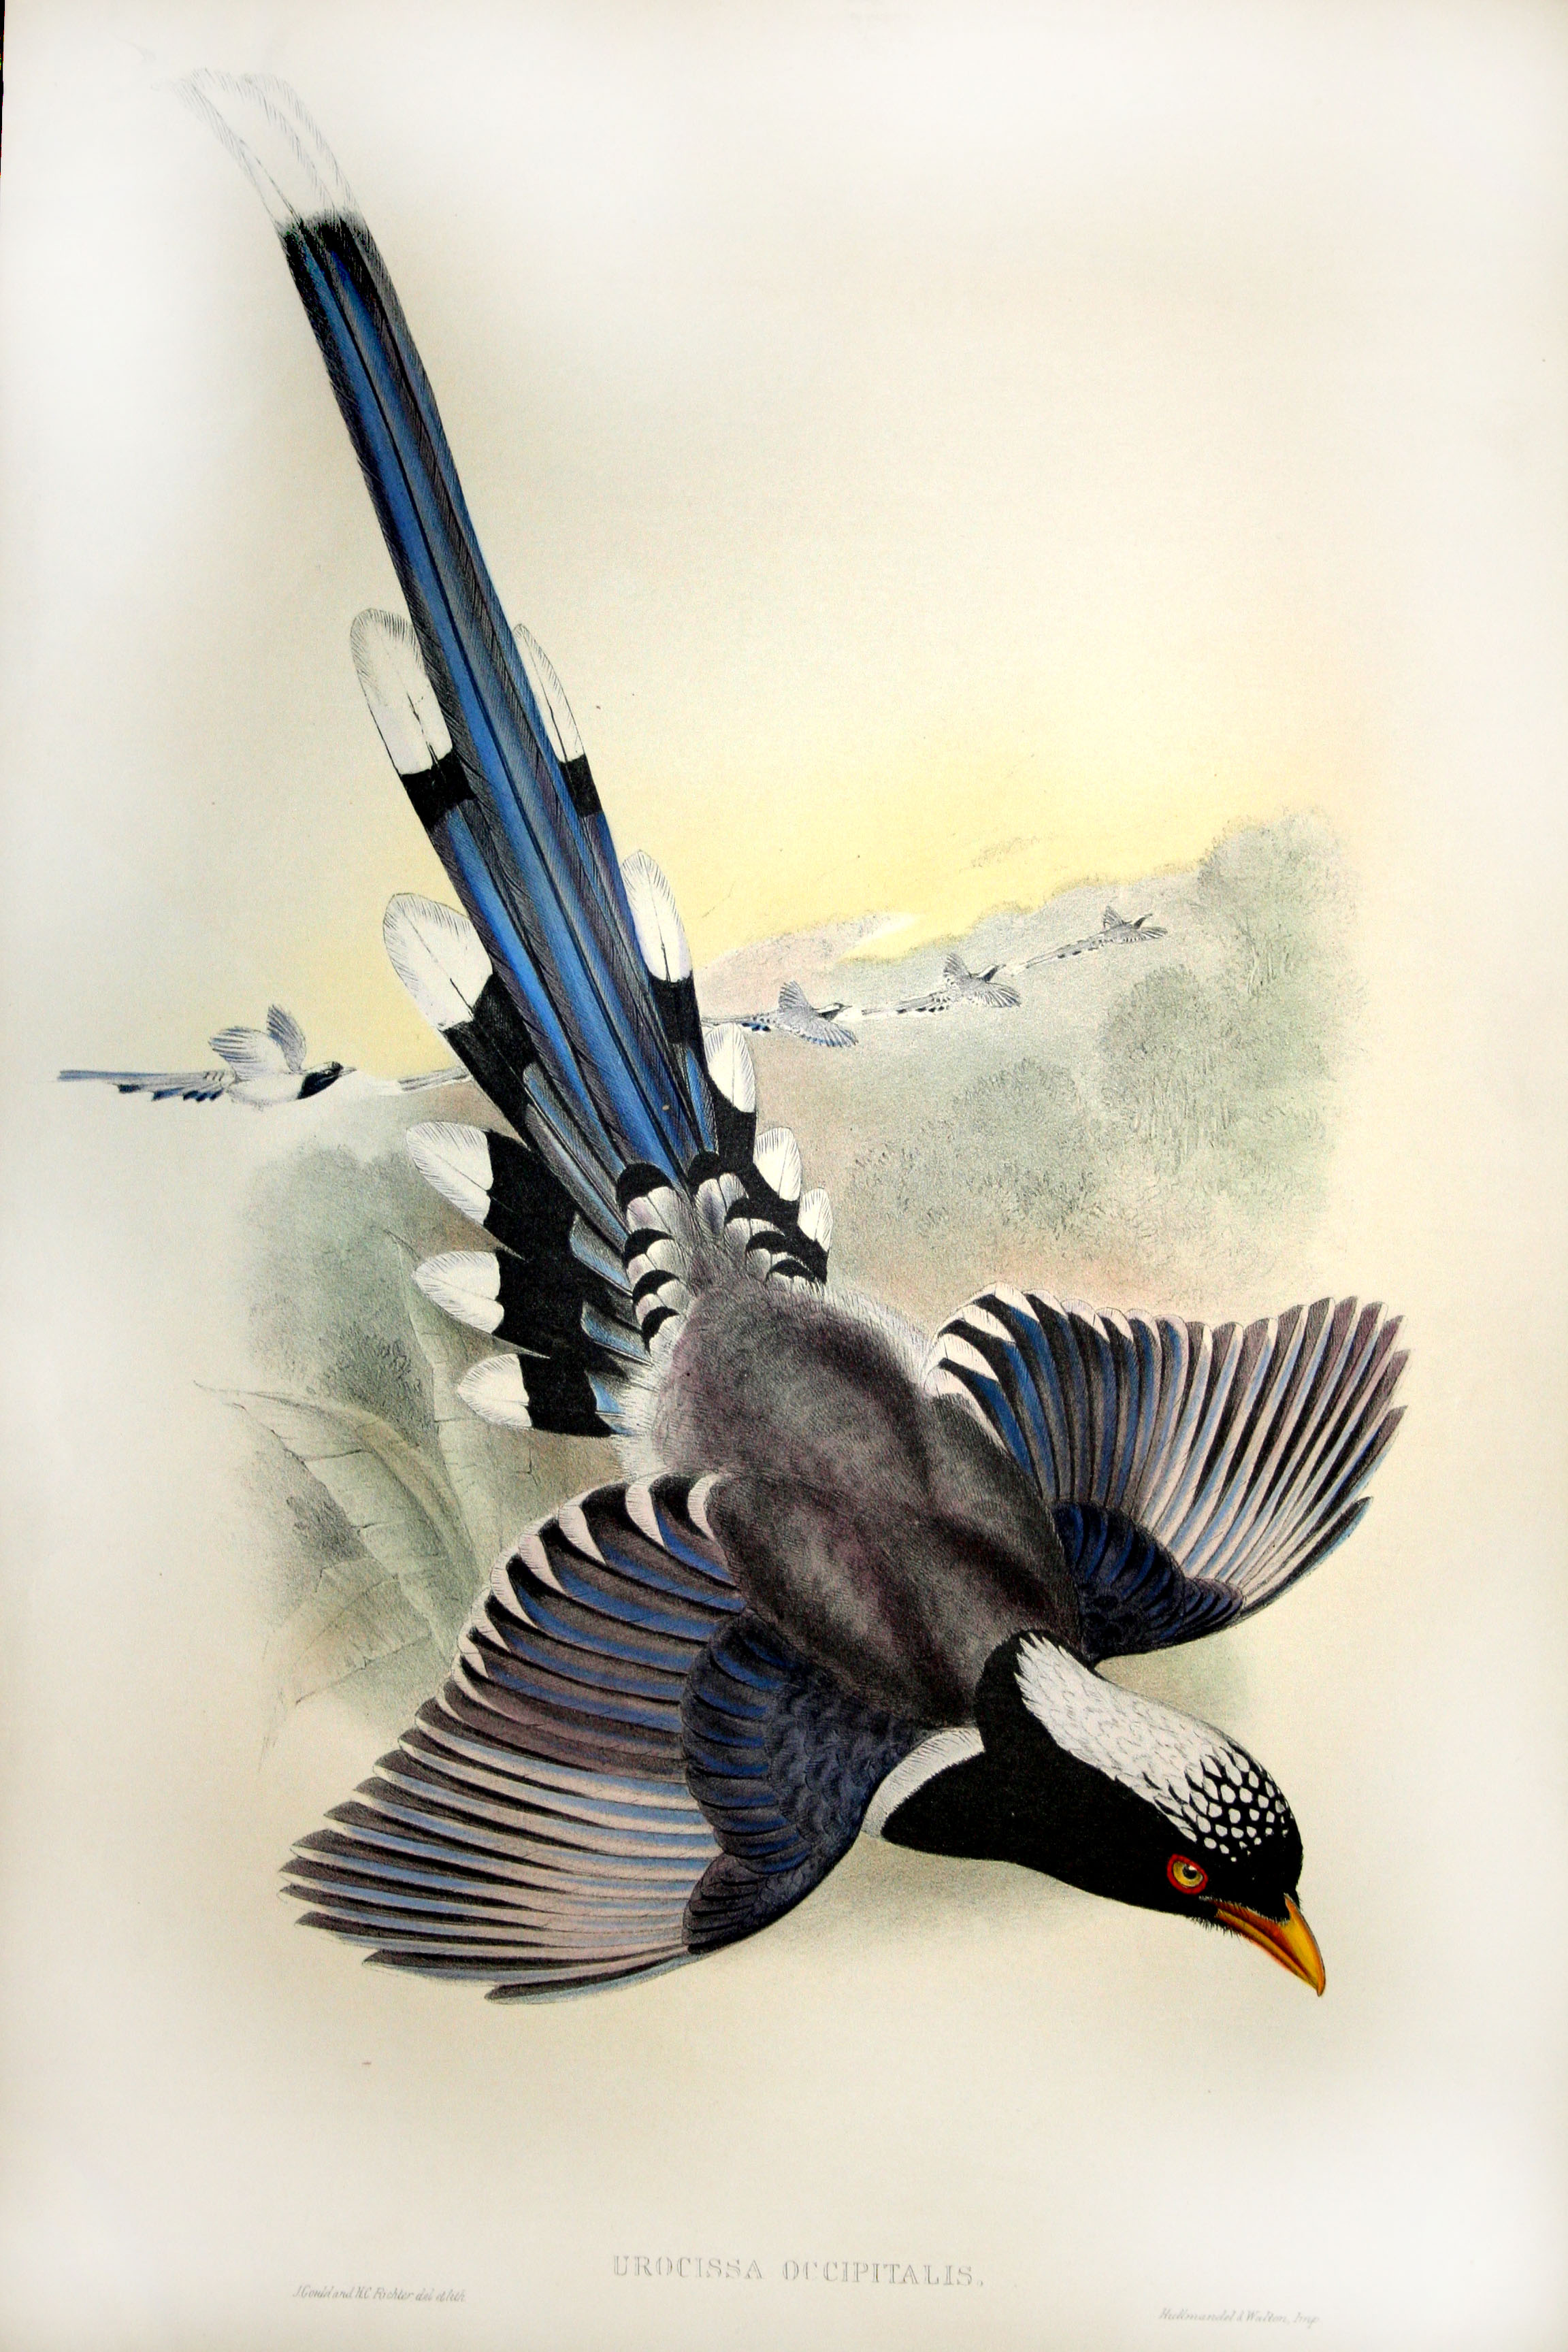 Original Hand Colored Lithograph By John Gould